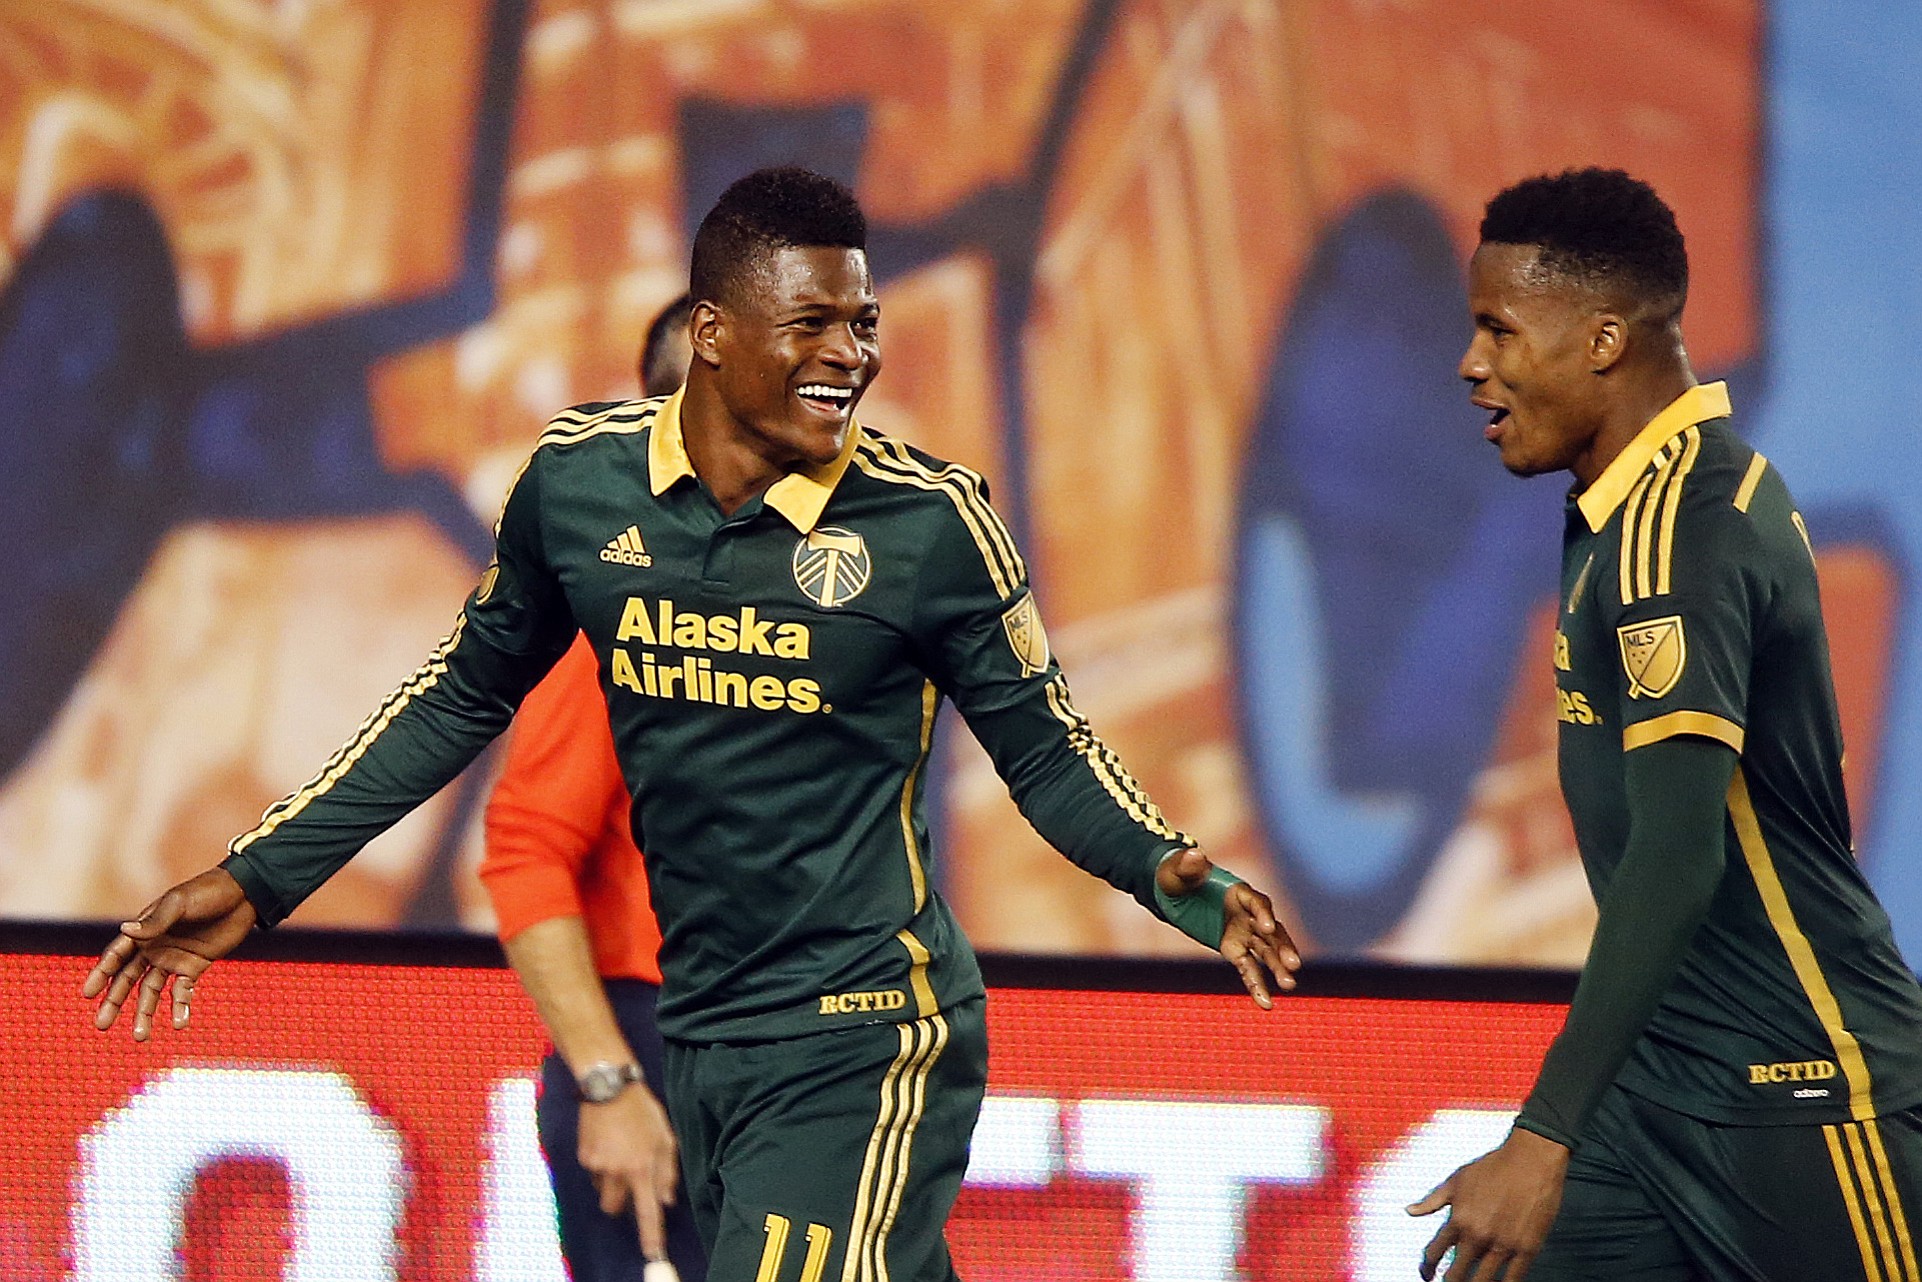 Portland Timbers' Dairon Asprilla (11), of Colombia, celebrates with teammate  Alvas Powell, of Jamaica, right, after scoring against New York City FC during an MLS soccer game at Yankee Stadium, Sunday, April 19, 2015, in New York.